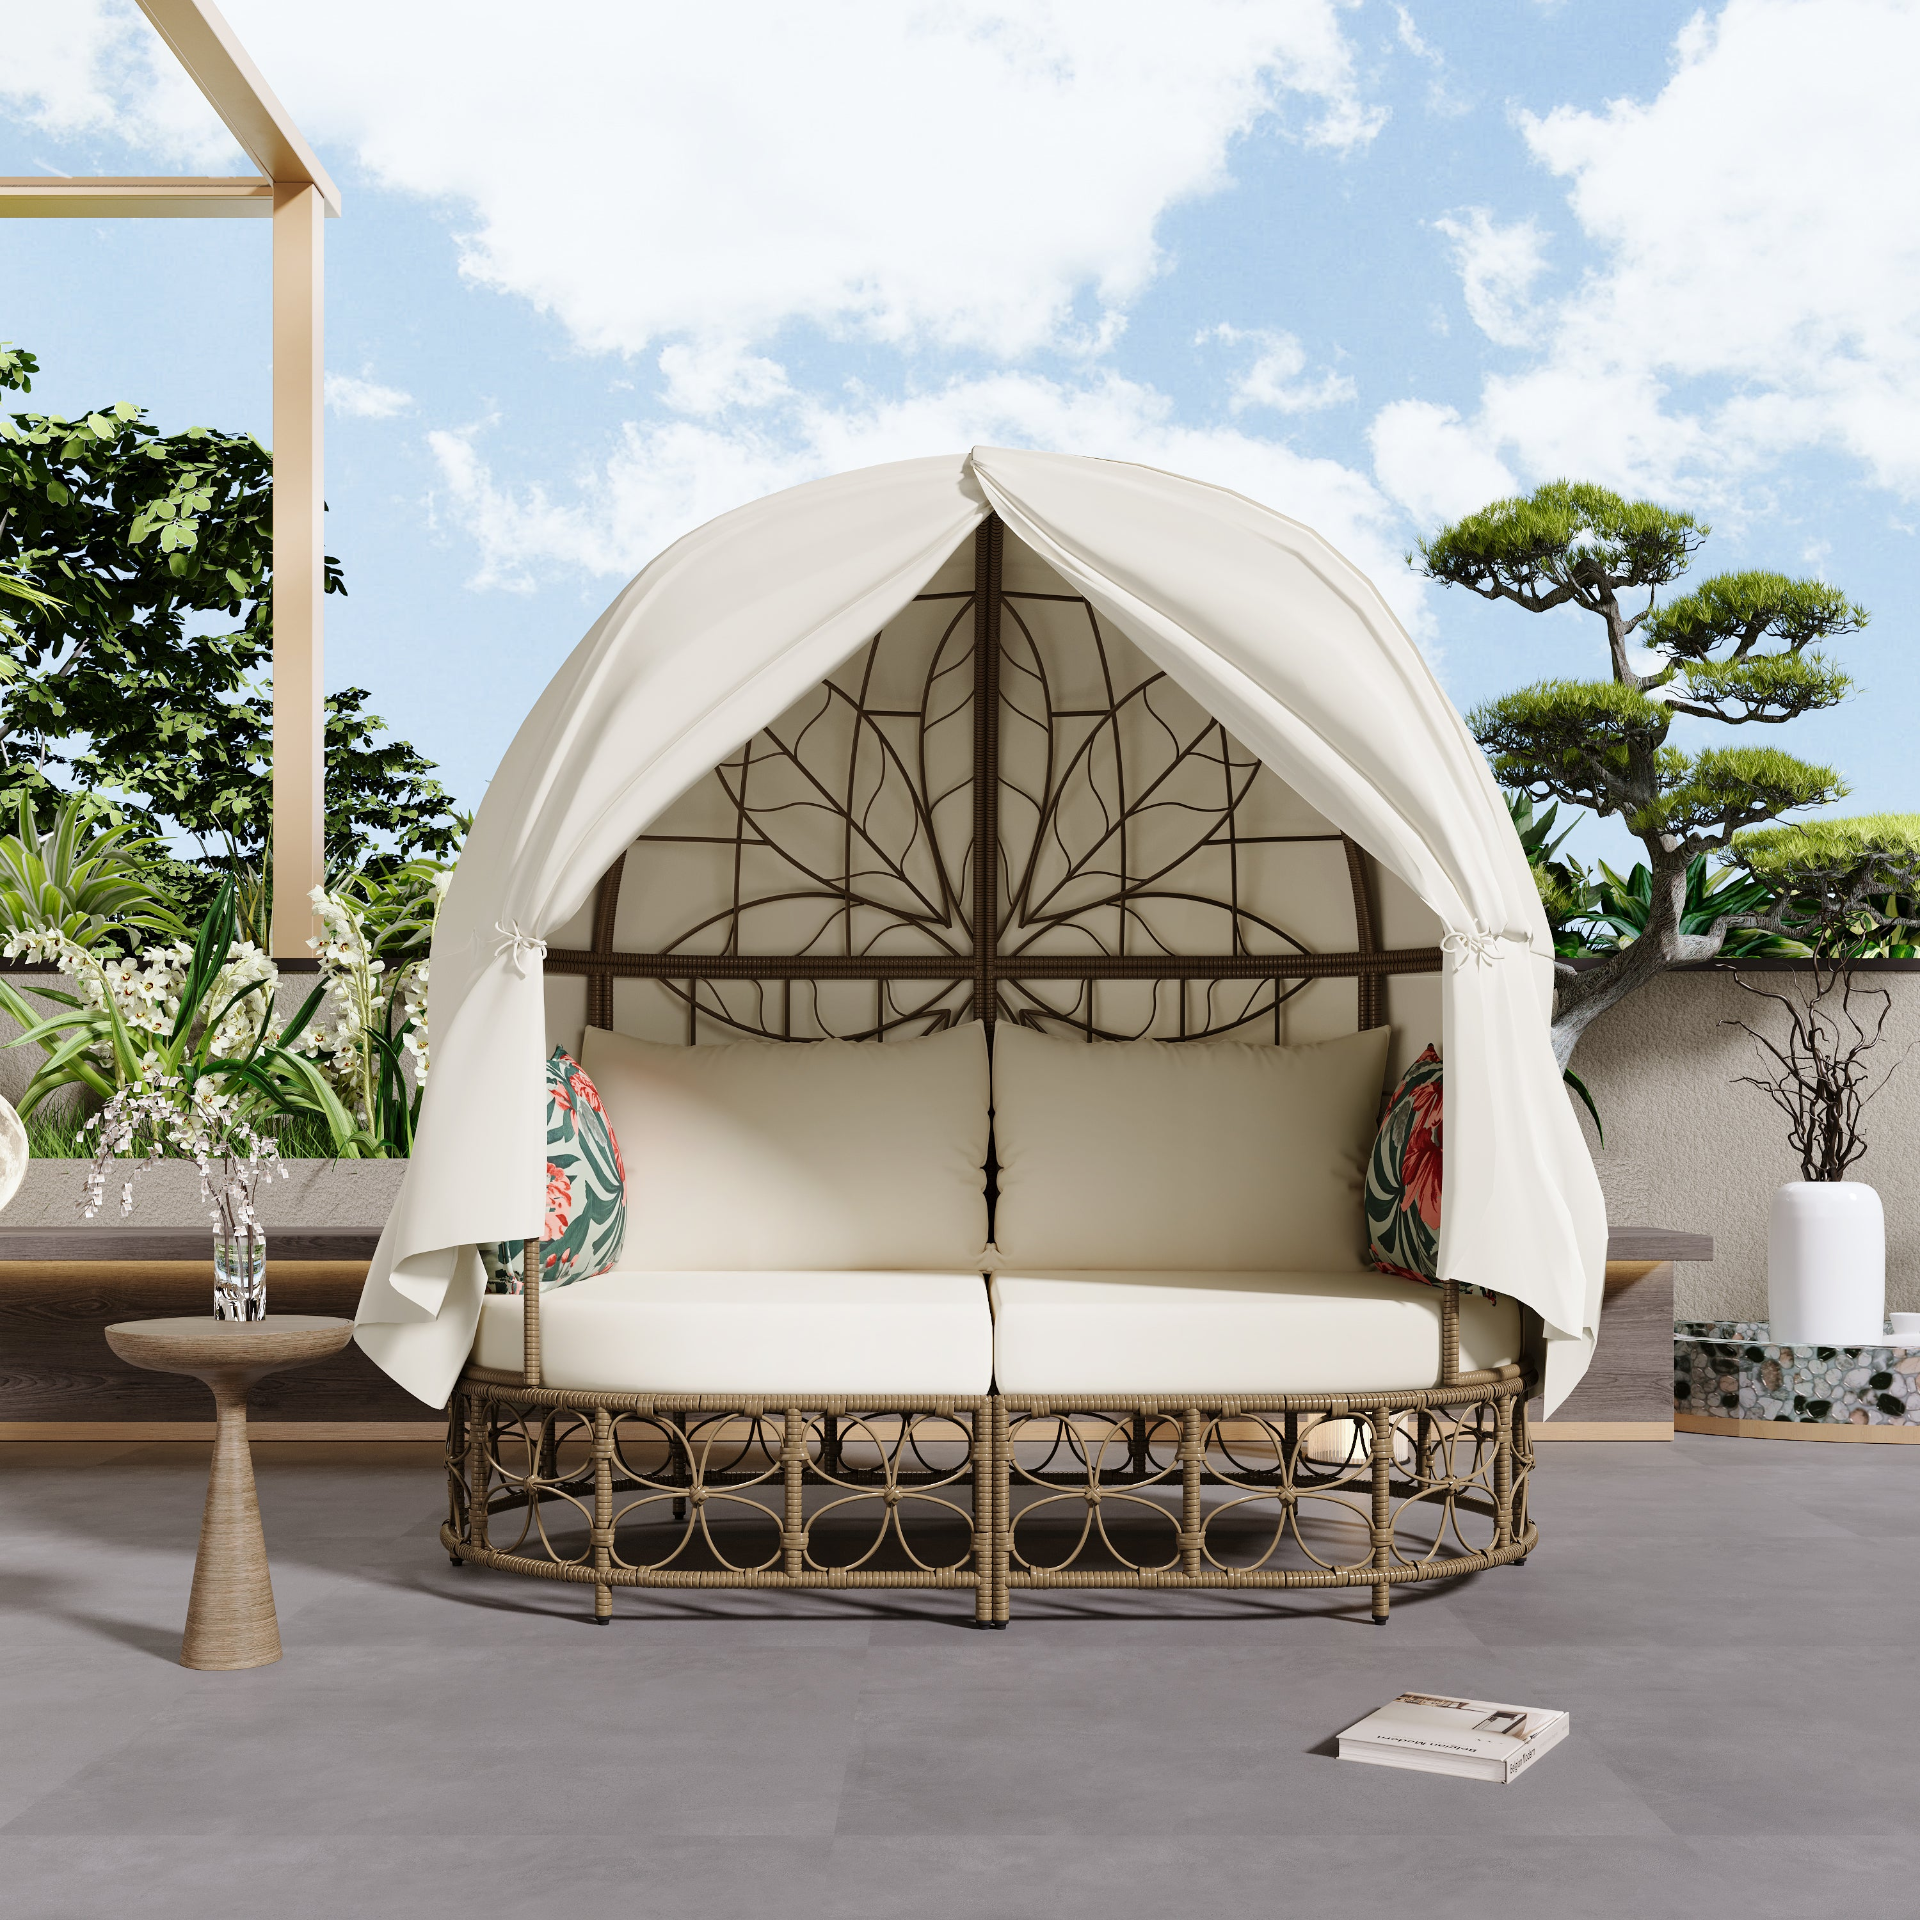 59.8" Daybed Outdoor Sunbed With Colorful Pillows, Wicker Patio Daybed With Curtain, Floral Pattern, Natural Wicker, Beige Cushion